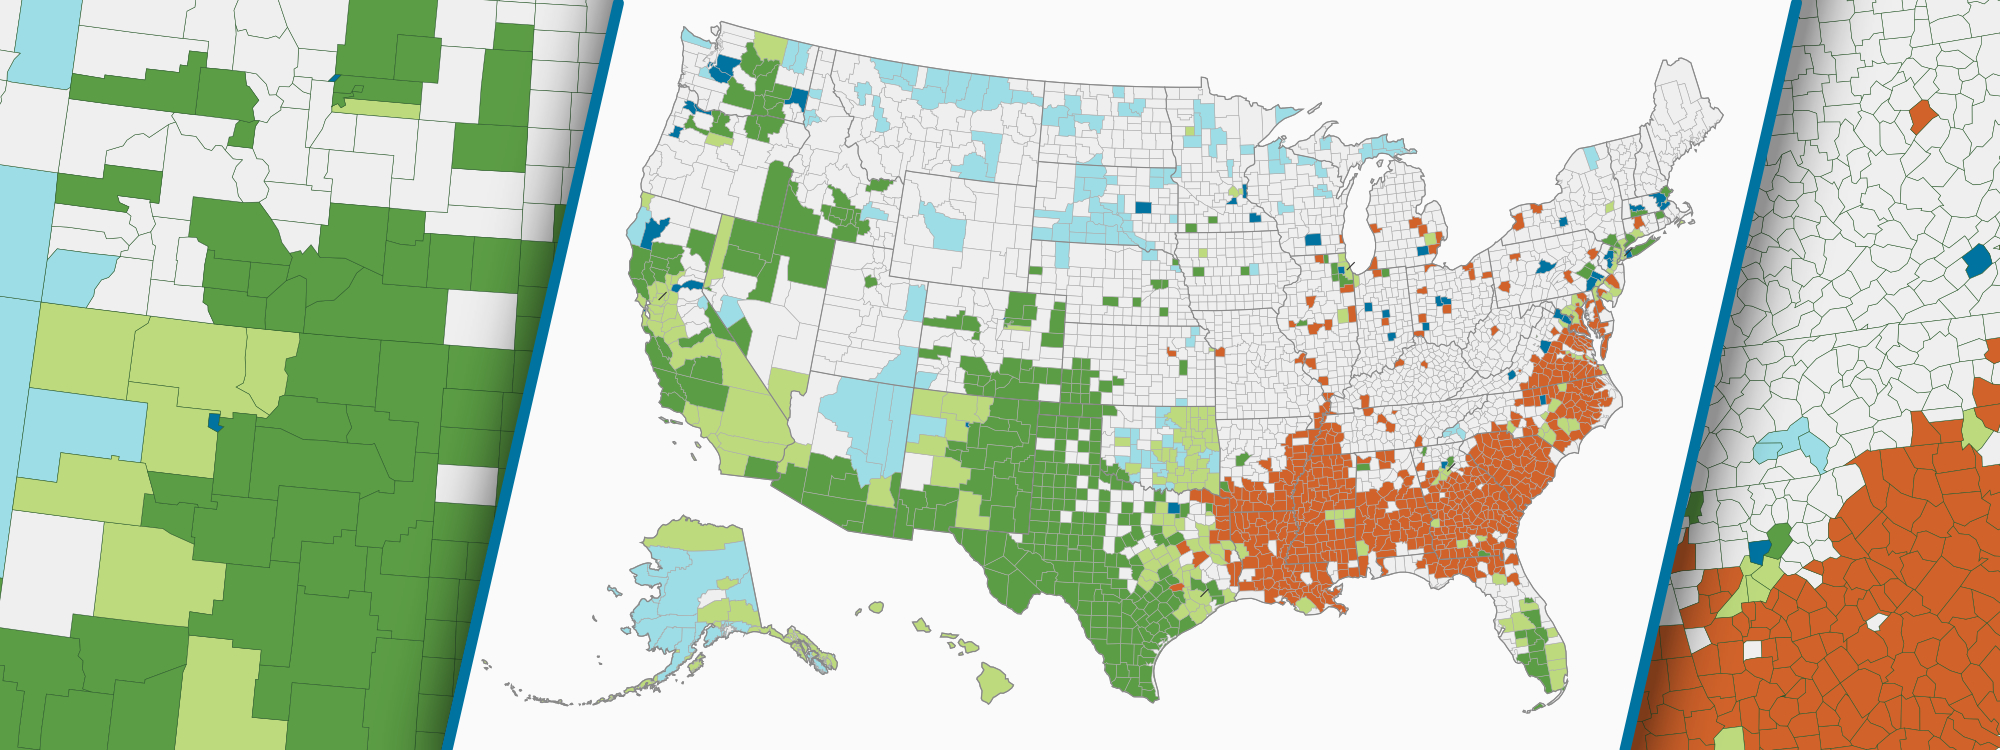 Measuring Racial and Ethnic Diversity for the 2020 Census